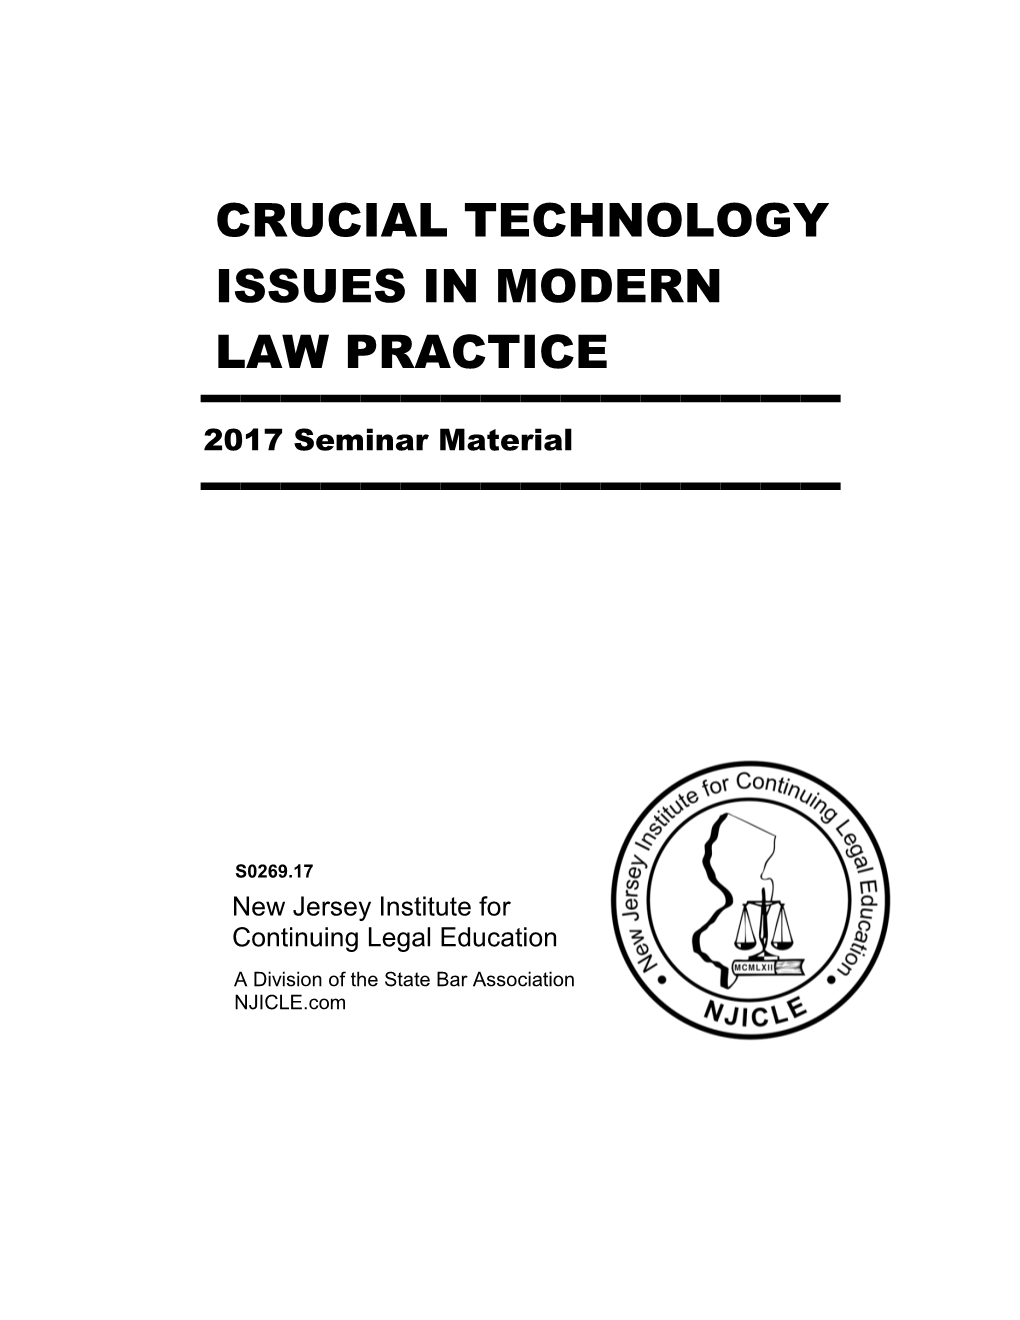 Crucial Technology Issues in Modern Law Practice